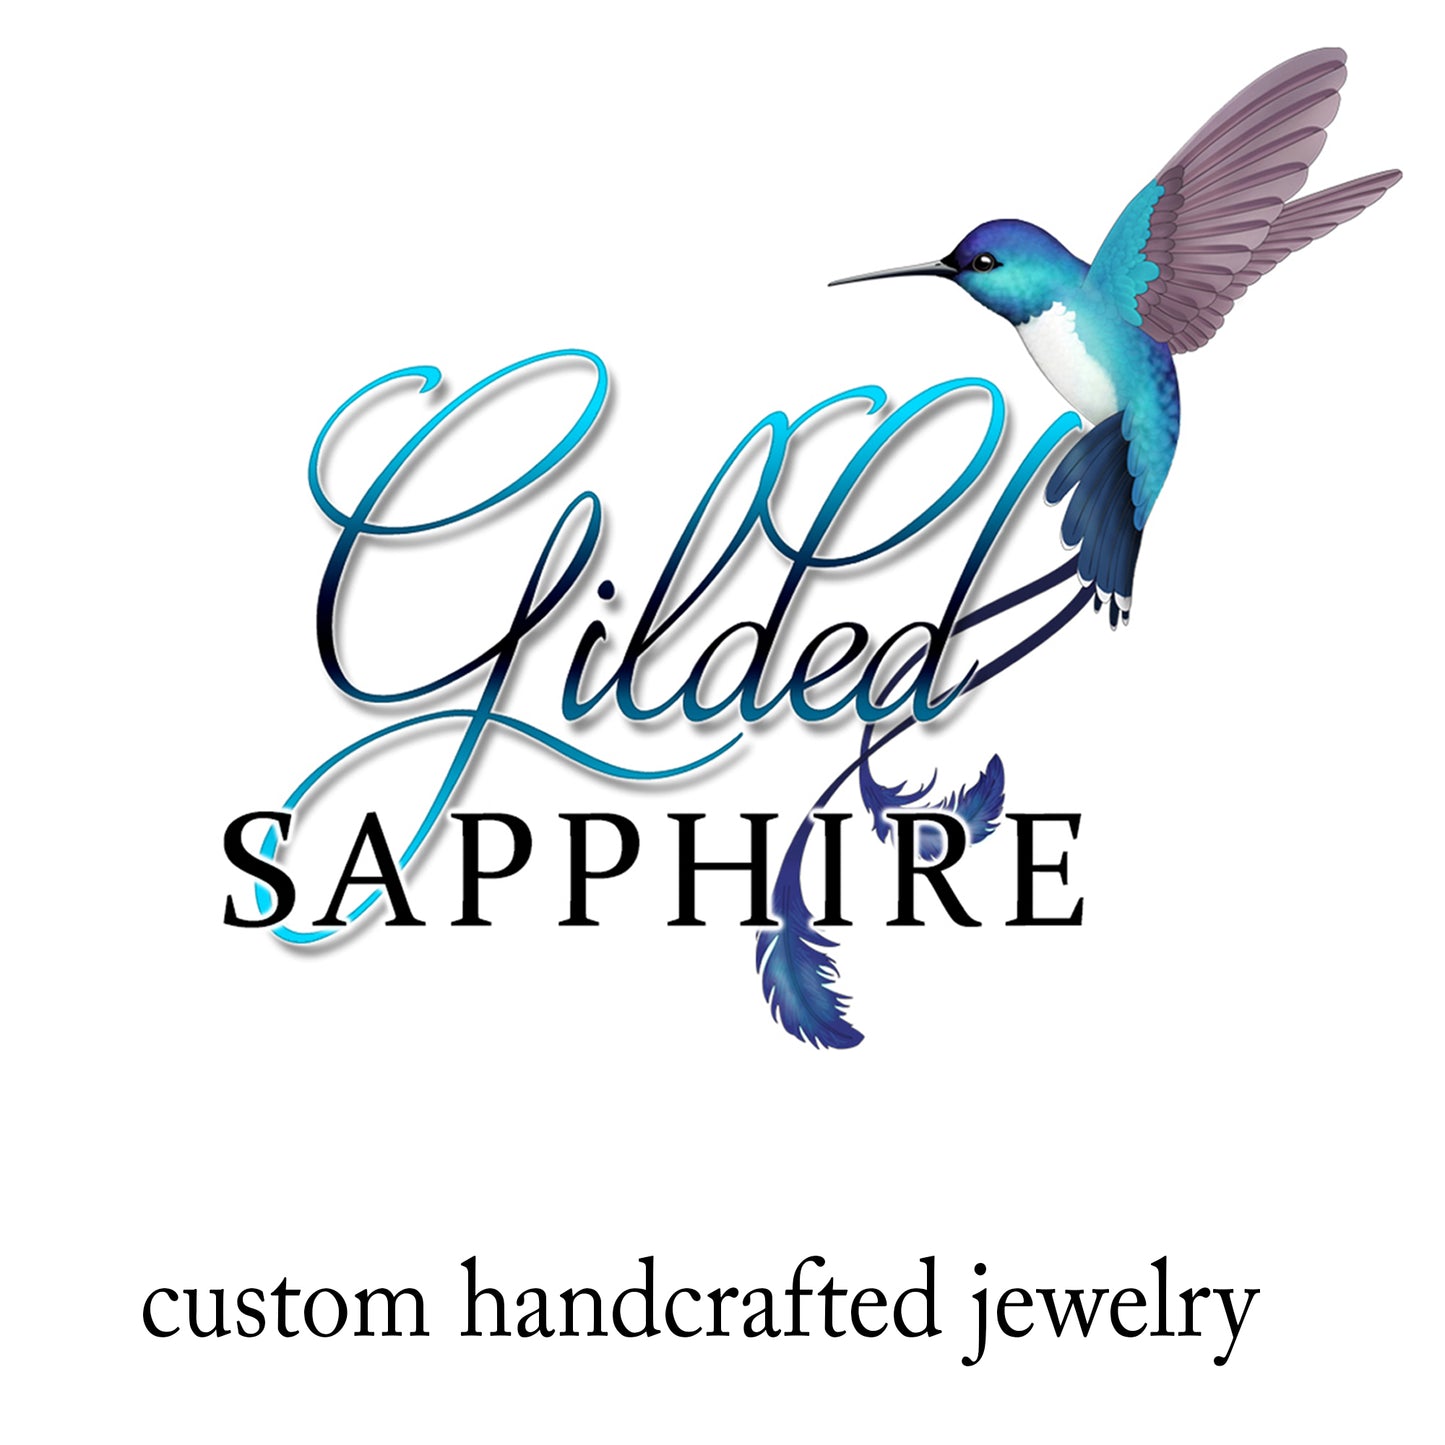 Gilded Sapphire custom jewelry logo with hummingbird for handmade bracelet and necklace gifts.